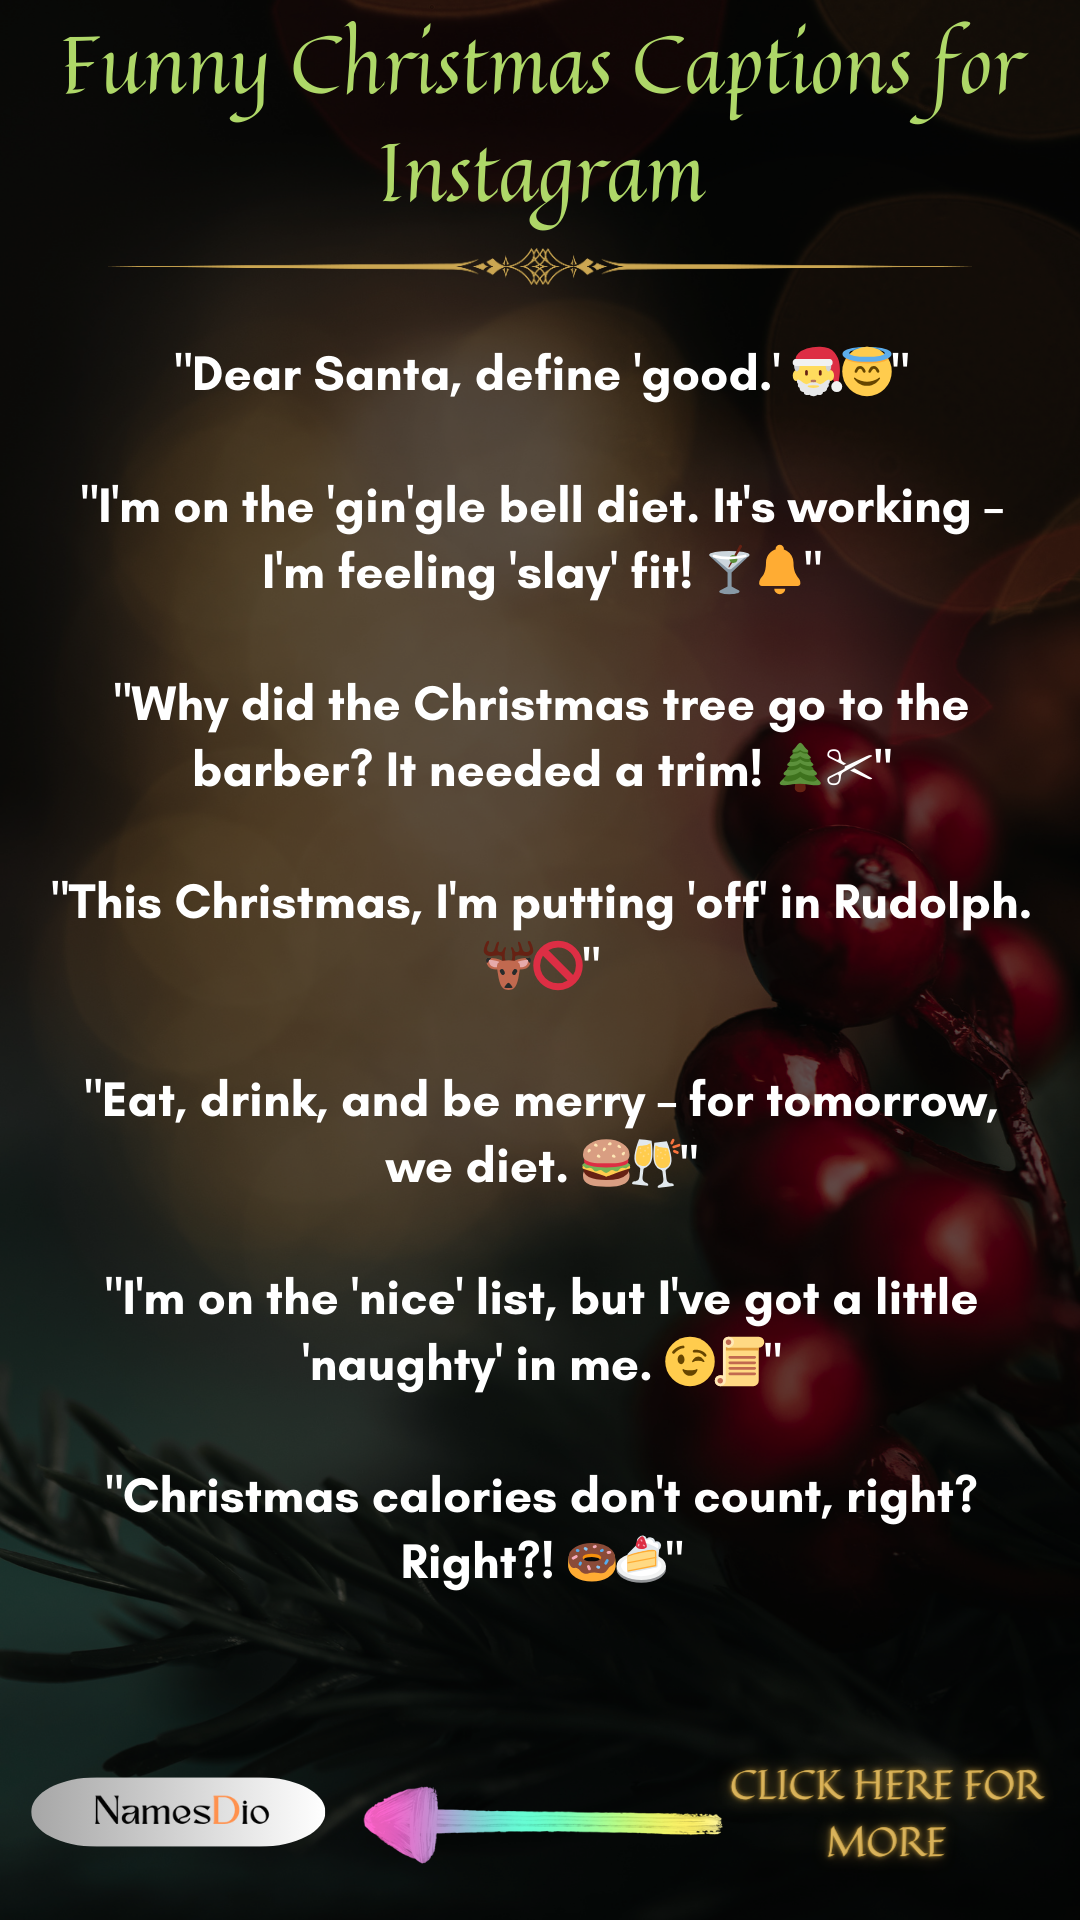 Funny-Christmas-Captions-for-Instagram